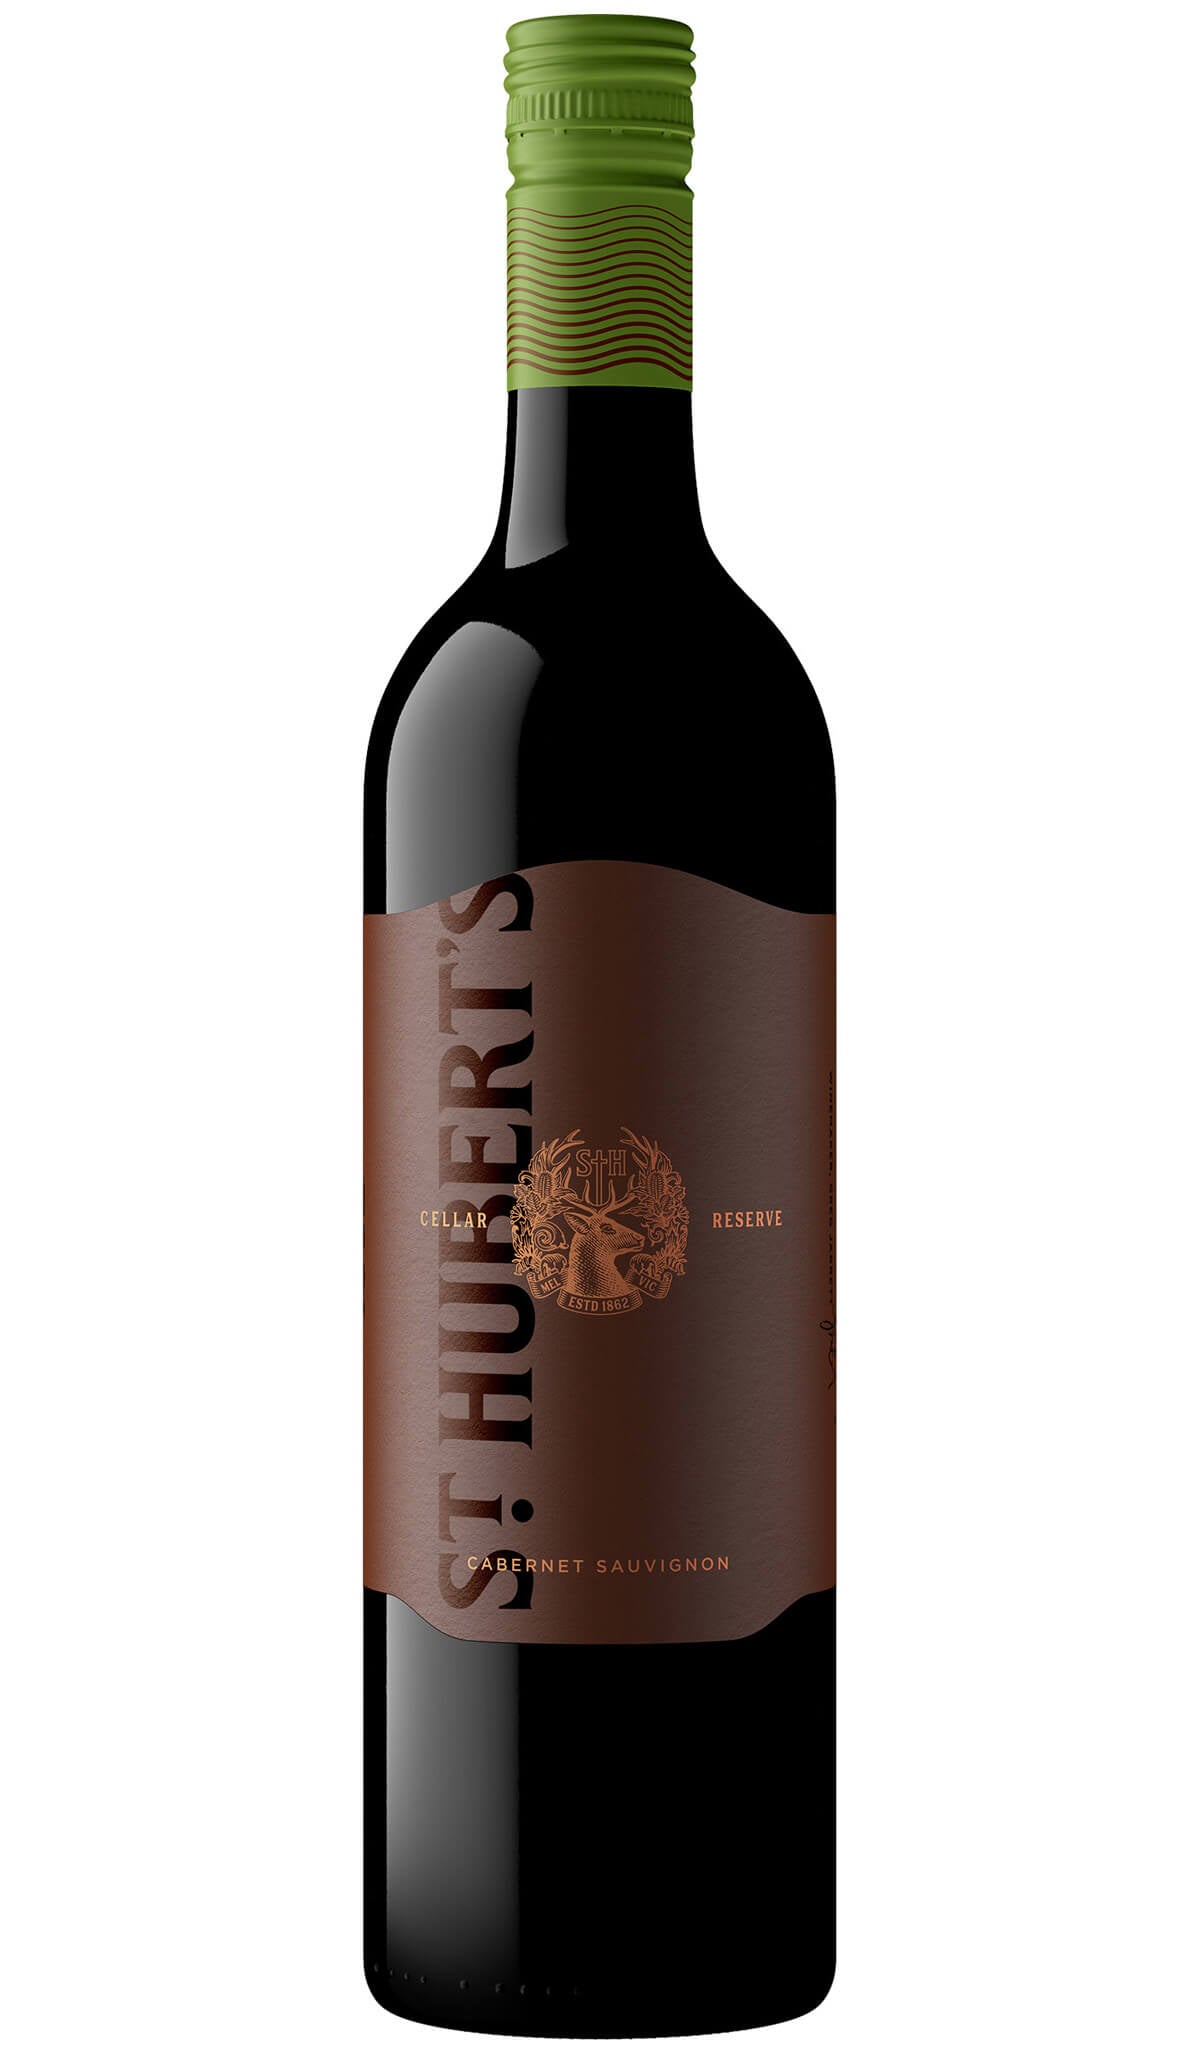 Find out more, explore the range and buy St Hubert's Yarra Valley Cabernet Sauvignon 2021 available online at Wine Sellers Direct - Australia's independent liquor specialists.